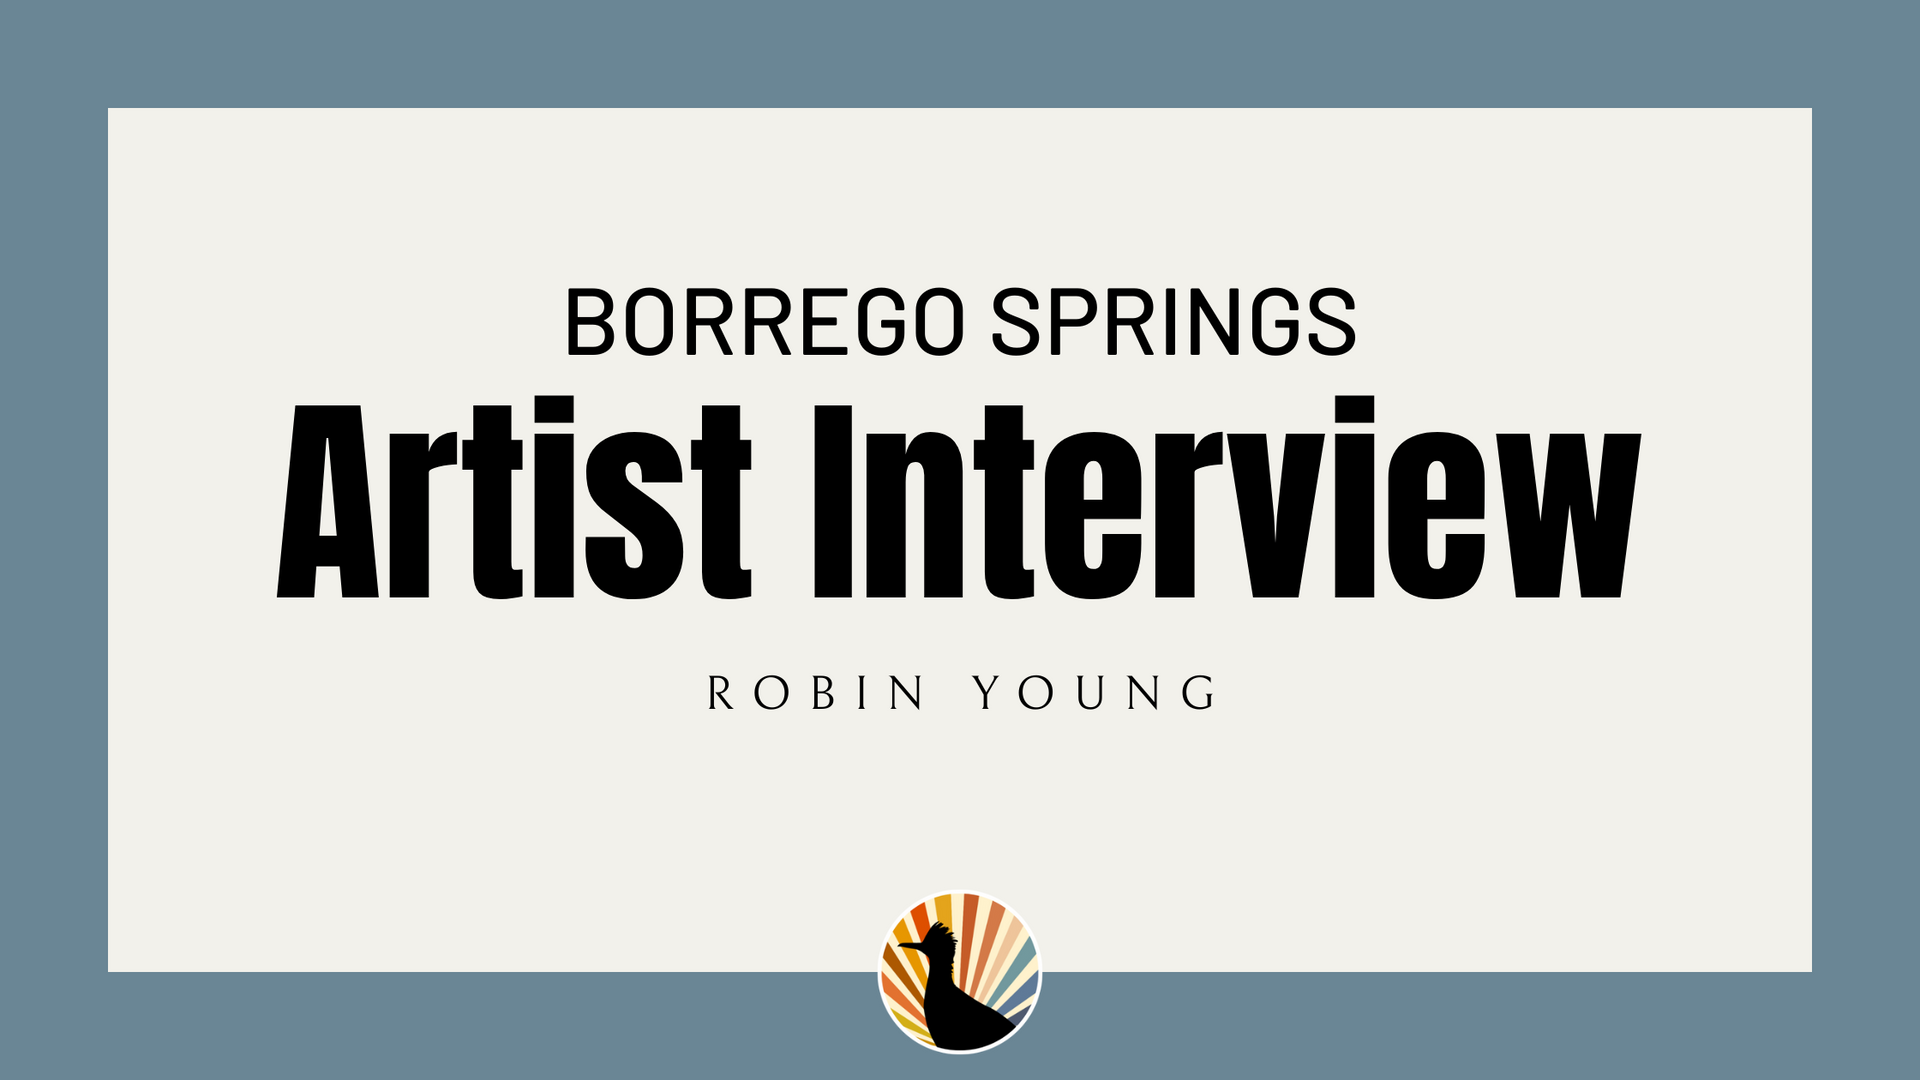 Borrego Springs Artist Interview with Robin Young